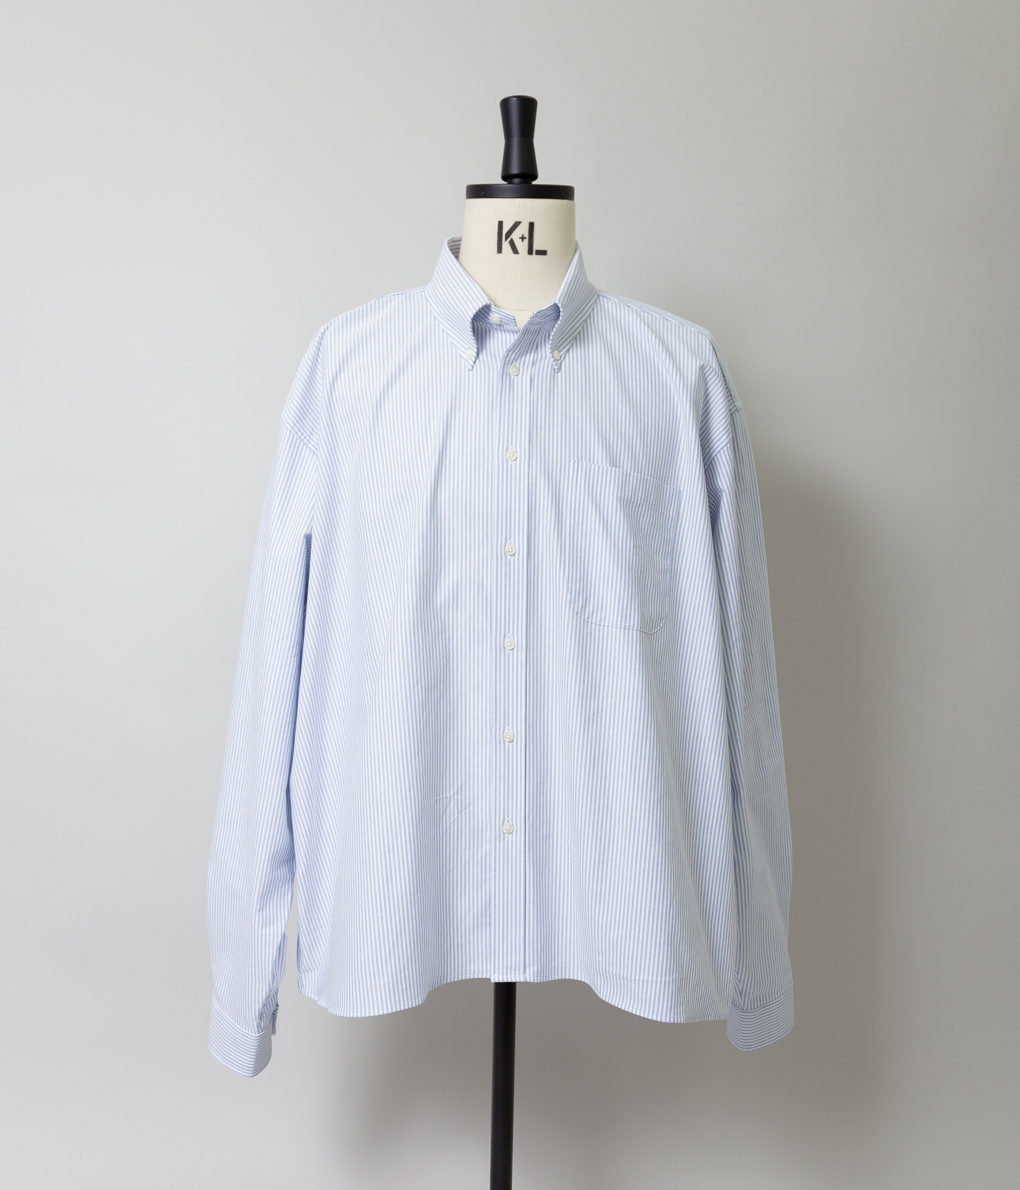 INDIVIDUALIZED SHIRT FOR SILLAGE “OXFORD WIDE SHIRT” | MAIDENS ...